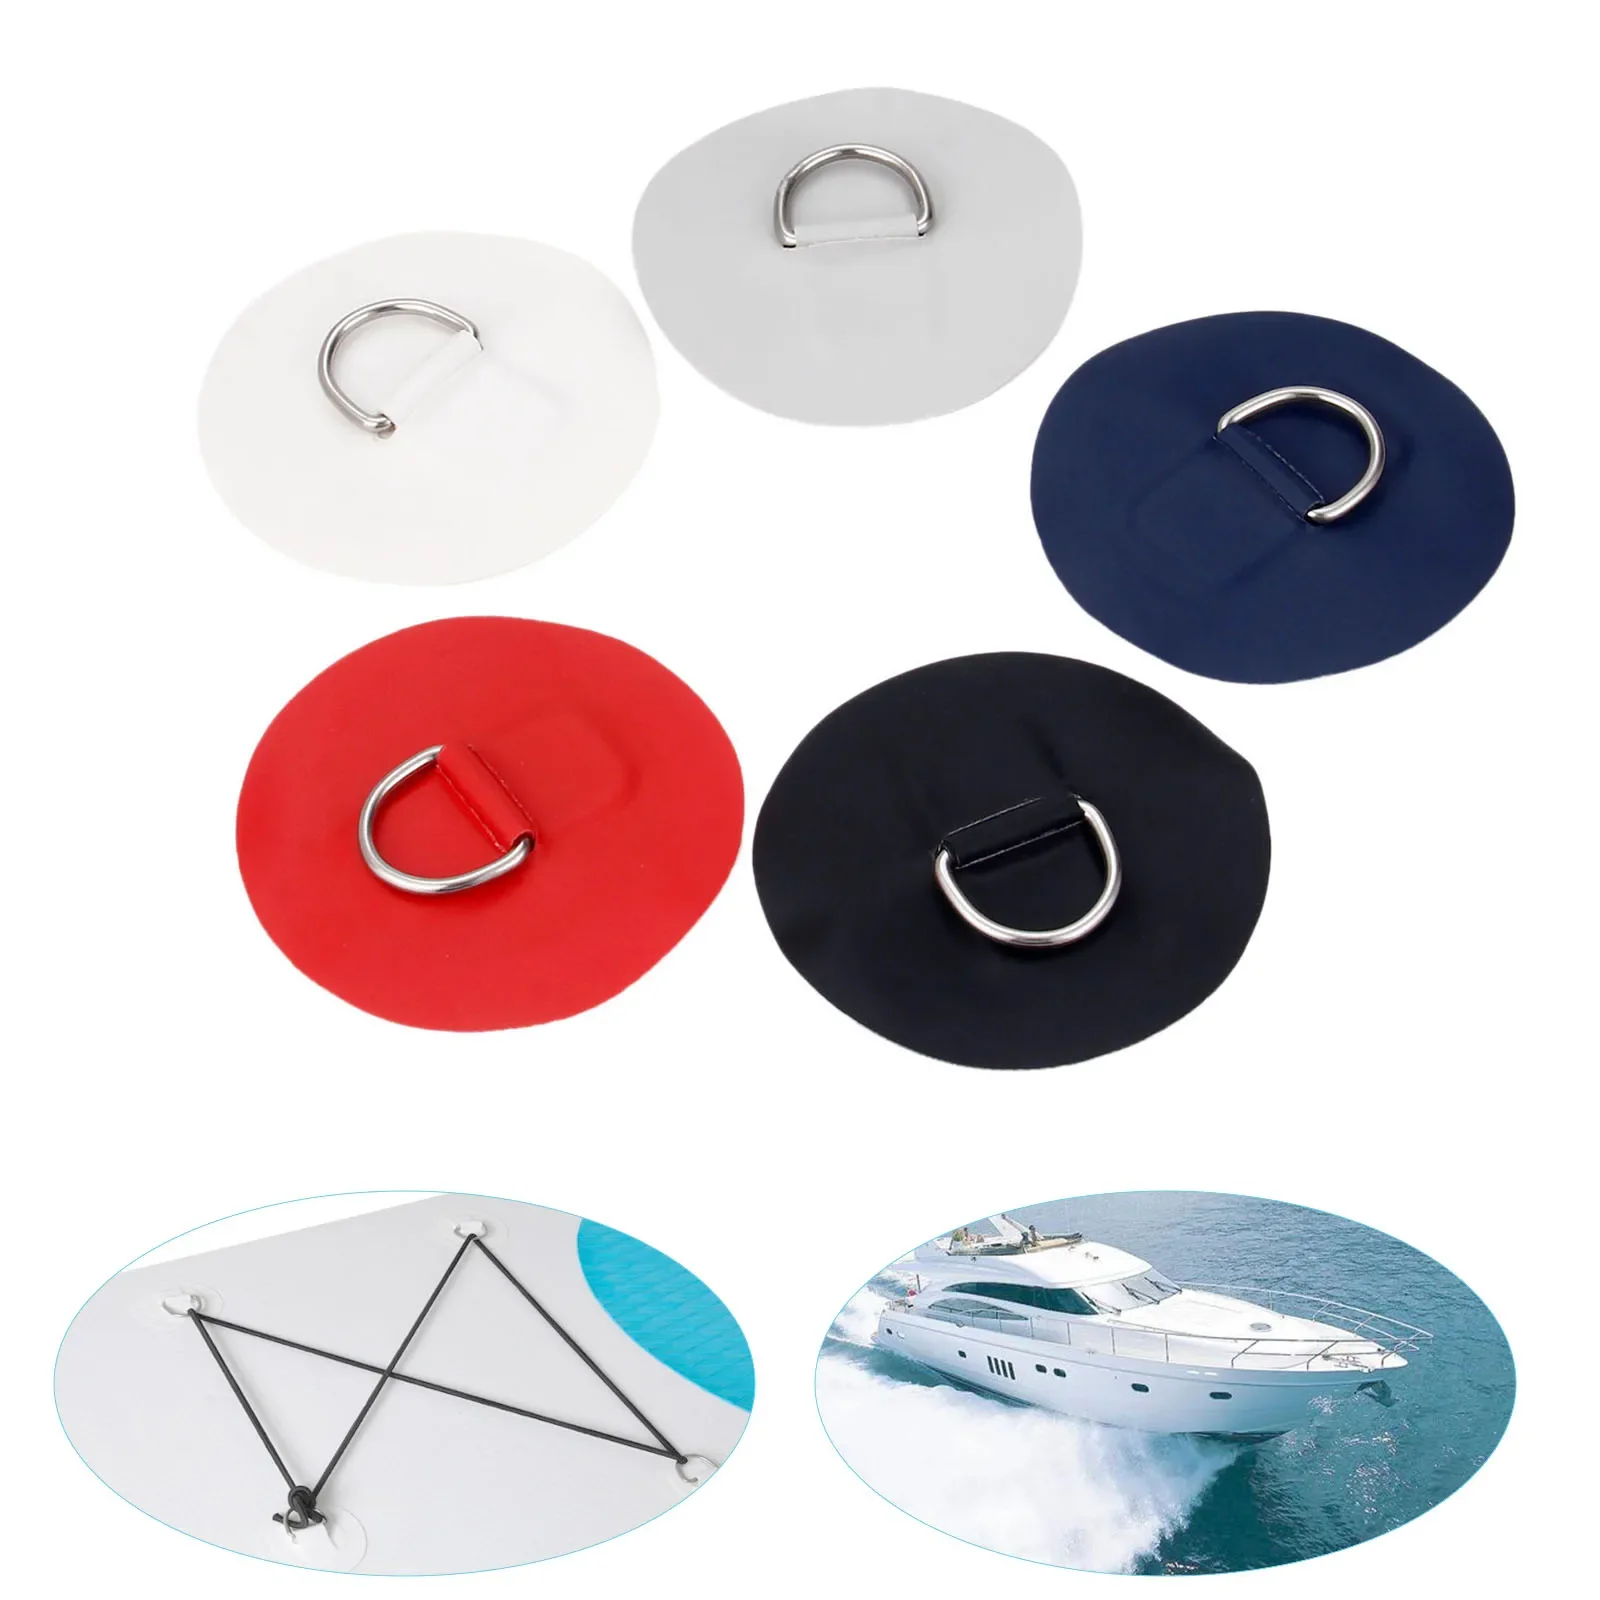 4 Pcs Marine Grade 316 Stainless Steel & PVC Kayak D-ring Pad Patch For Raft Canoe Surfboard Kayak Inflatable Boats Accessories